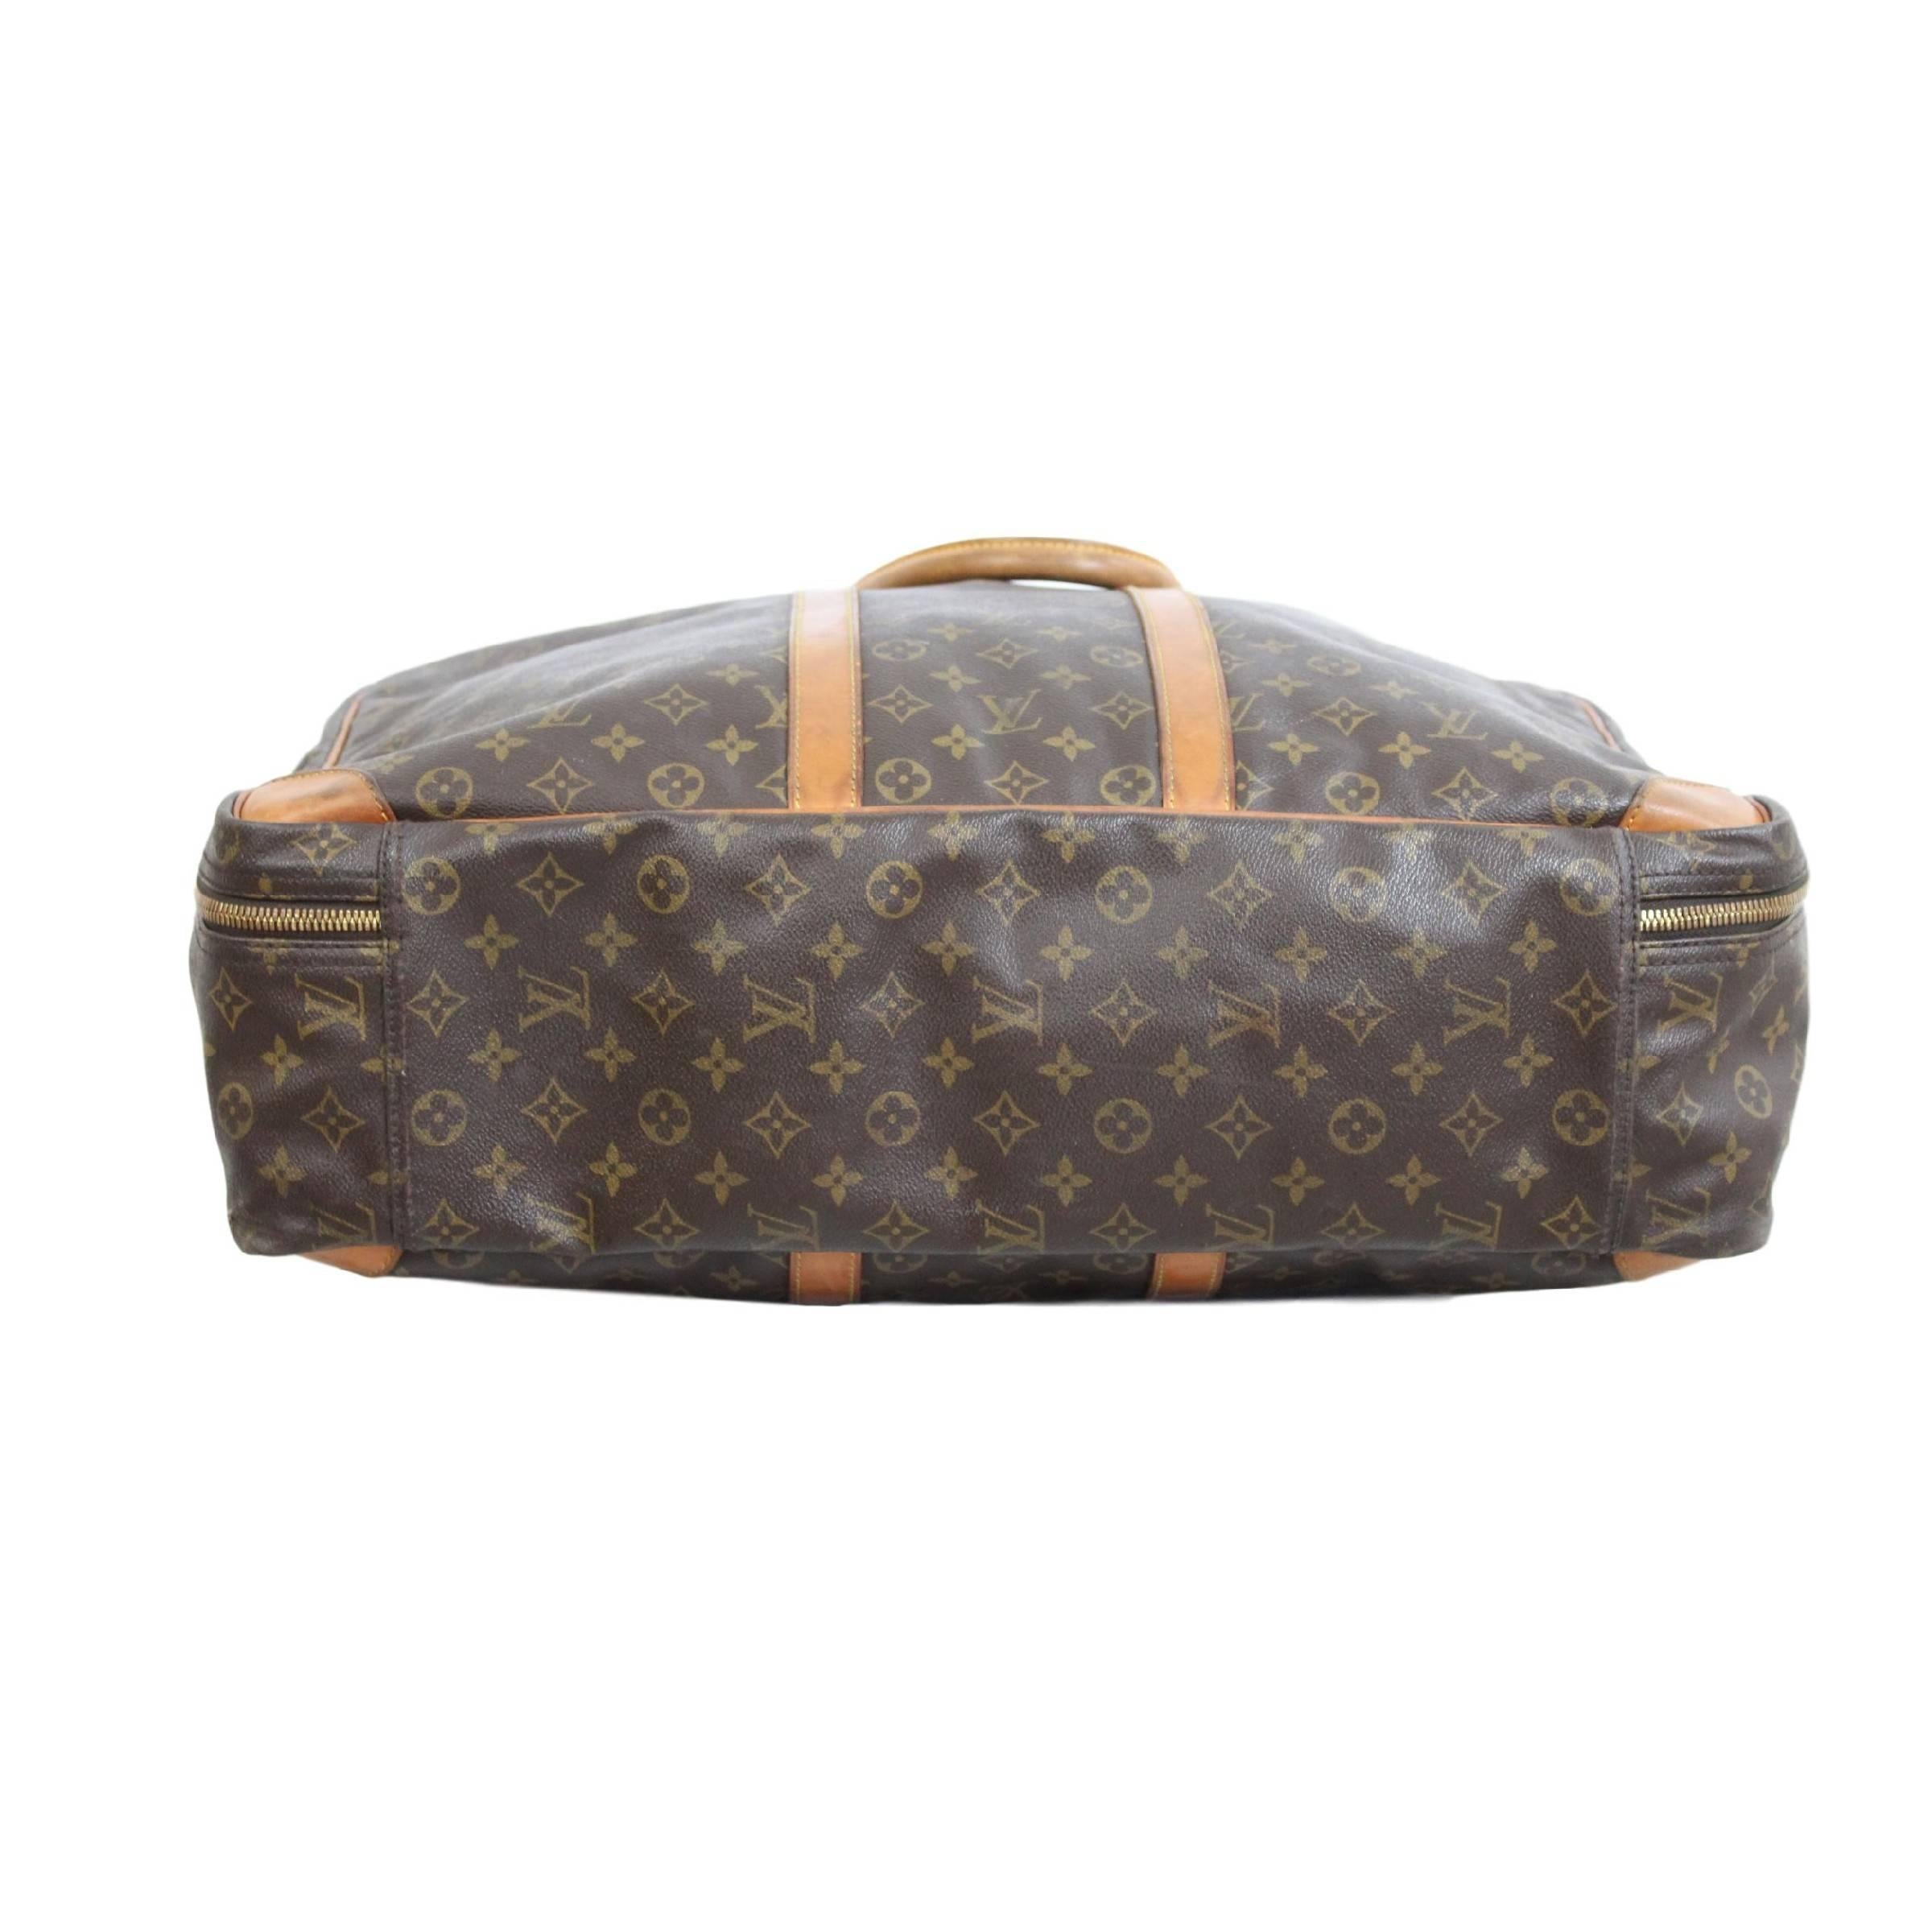 Louis Vuitton Sirius 55 travel bag Suitcase Brown Vintage Leather For Sale 1